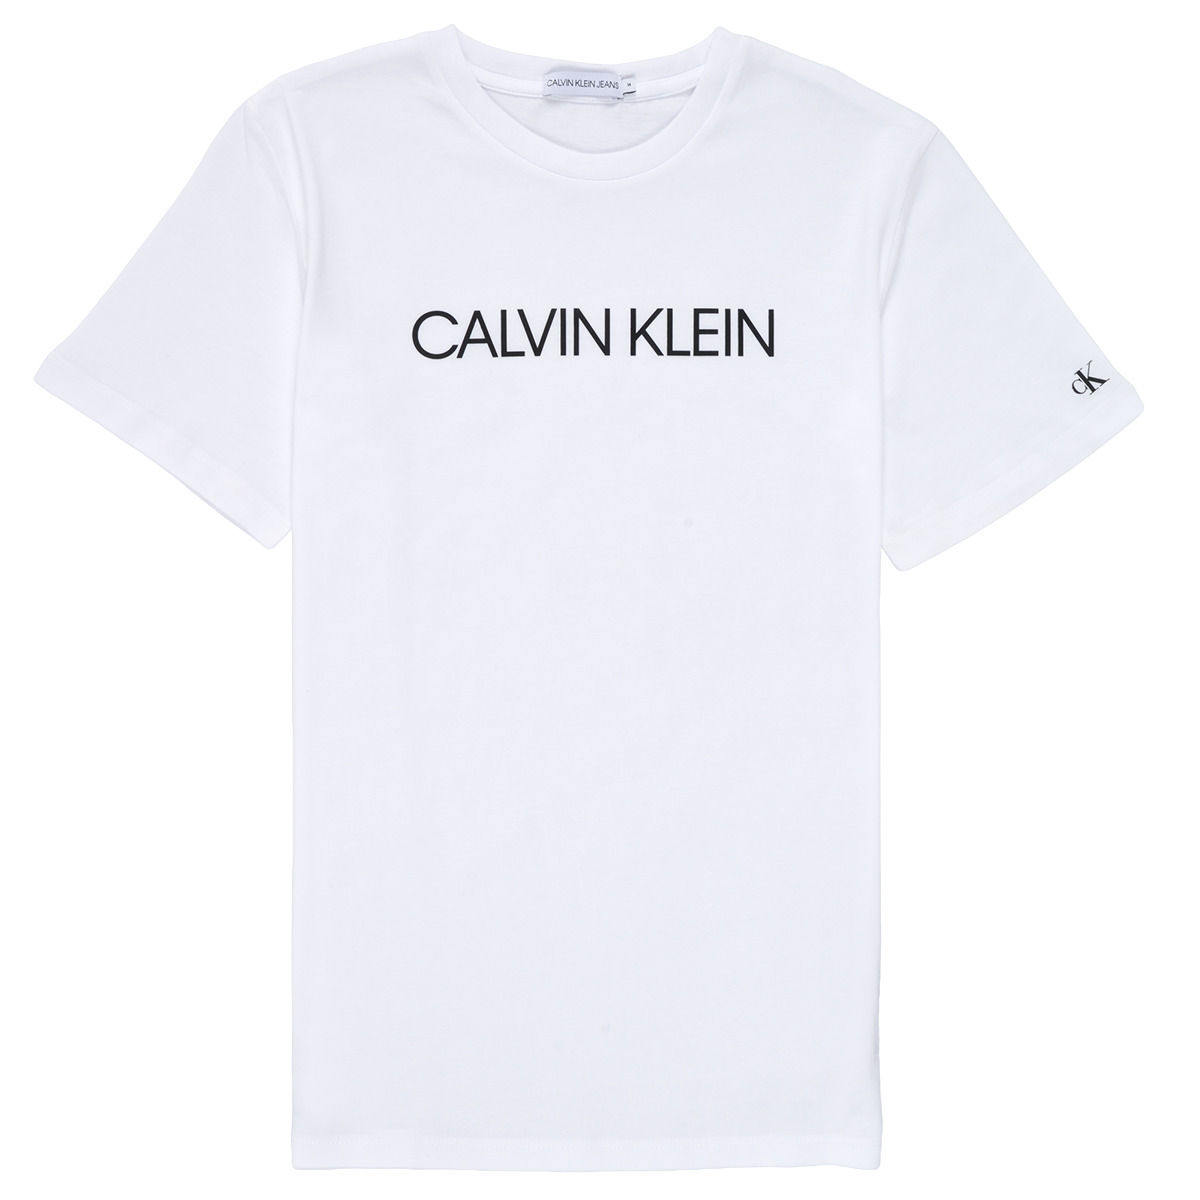 INSTITUTIONAL T-SHIRT Calvin NET Clothing Spartoo - White Jeans Child - t-shirts | Klein delivery short-sleeved Free !